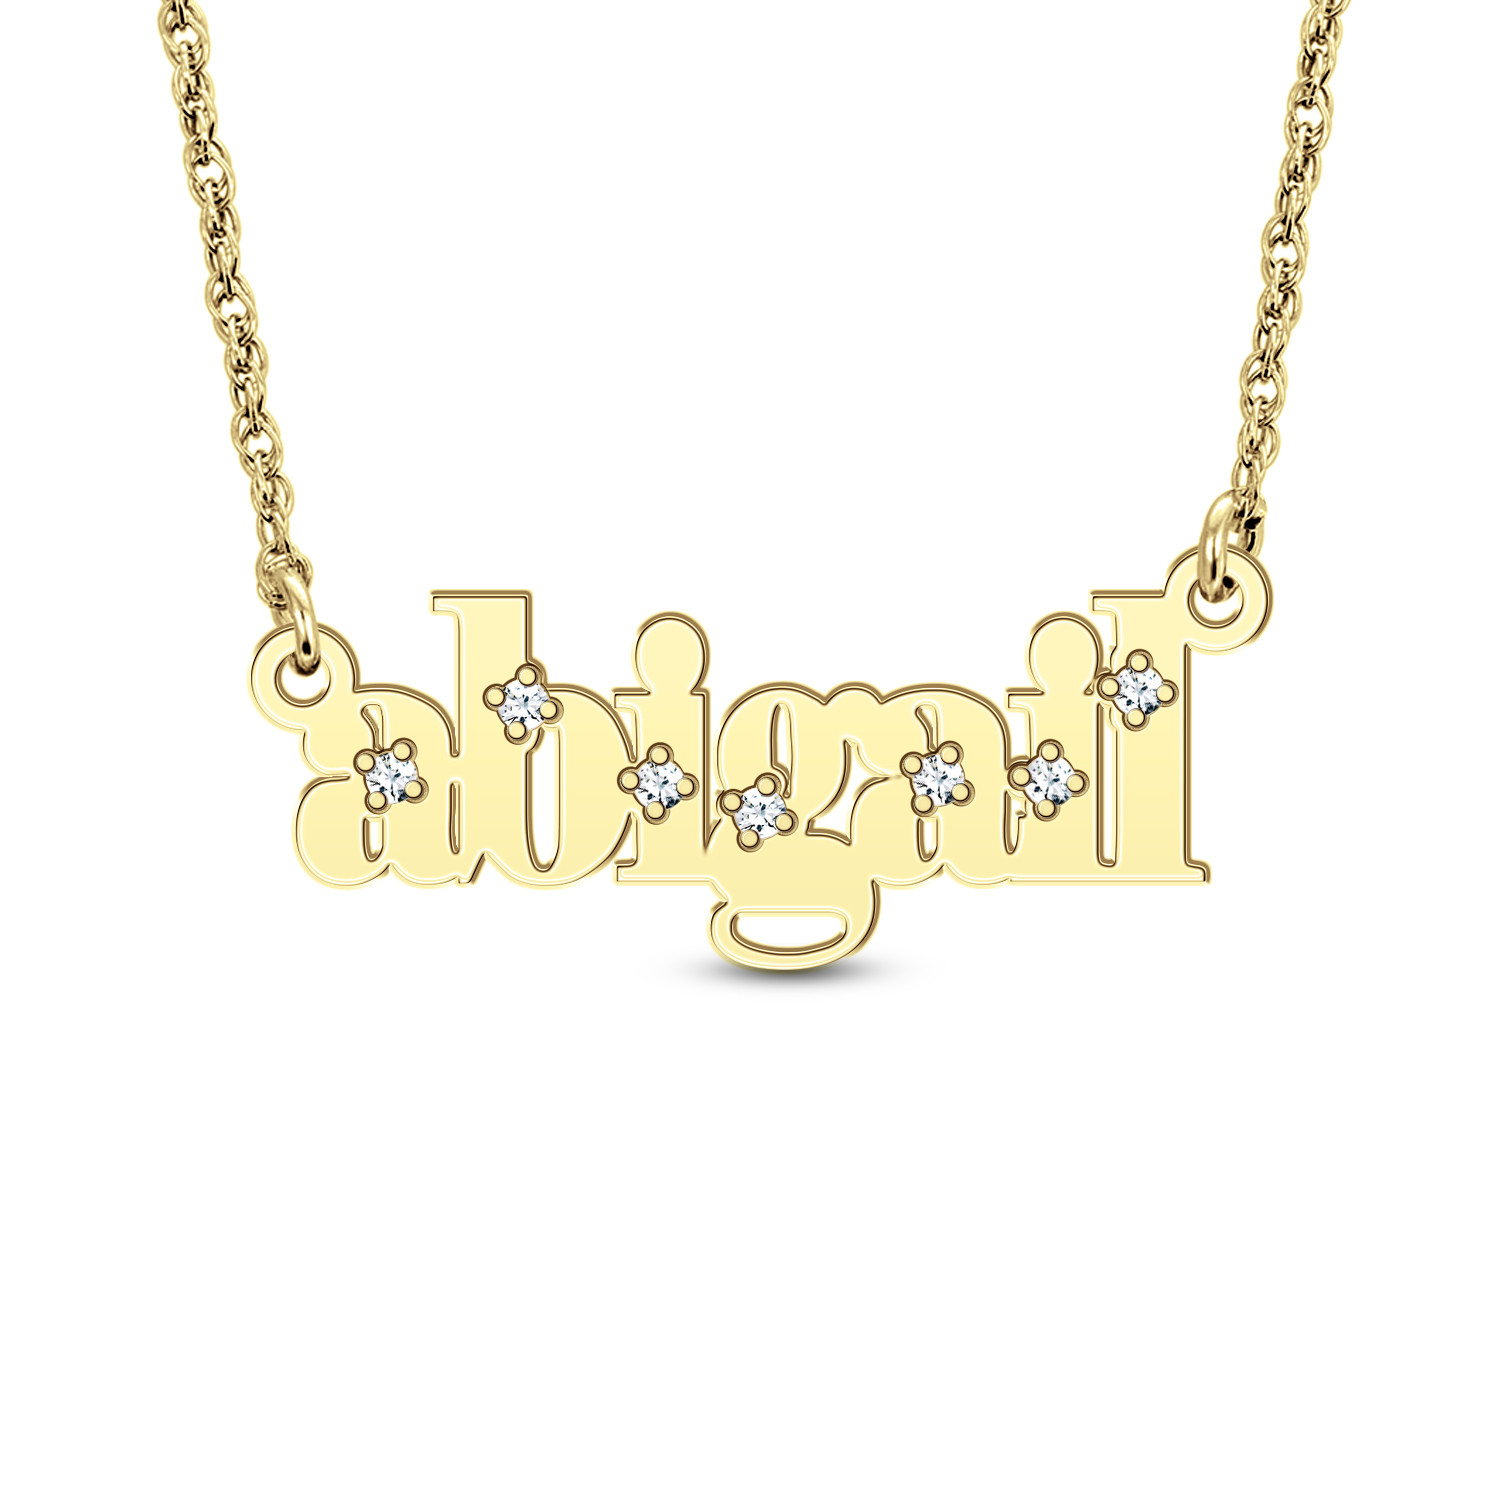 Dia Accent Name Pers Necklace